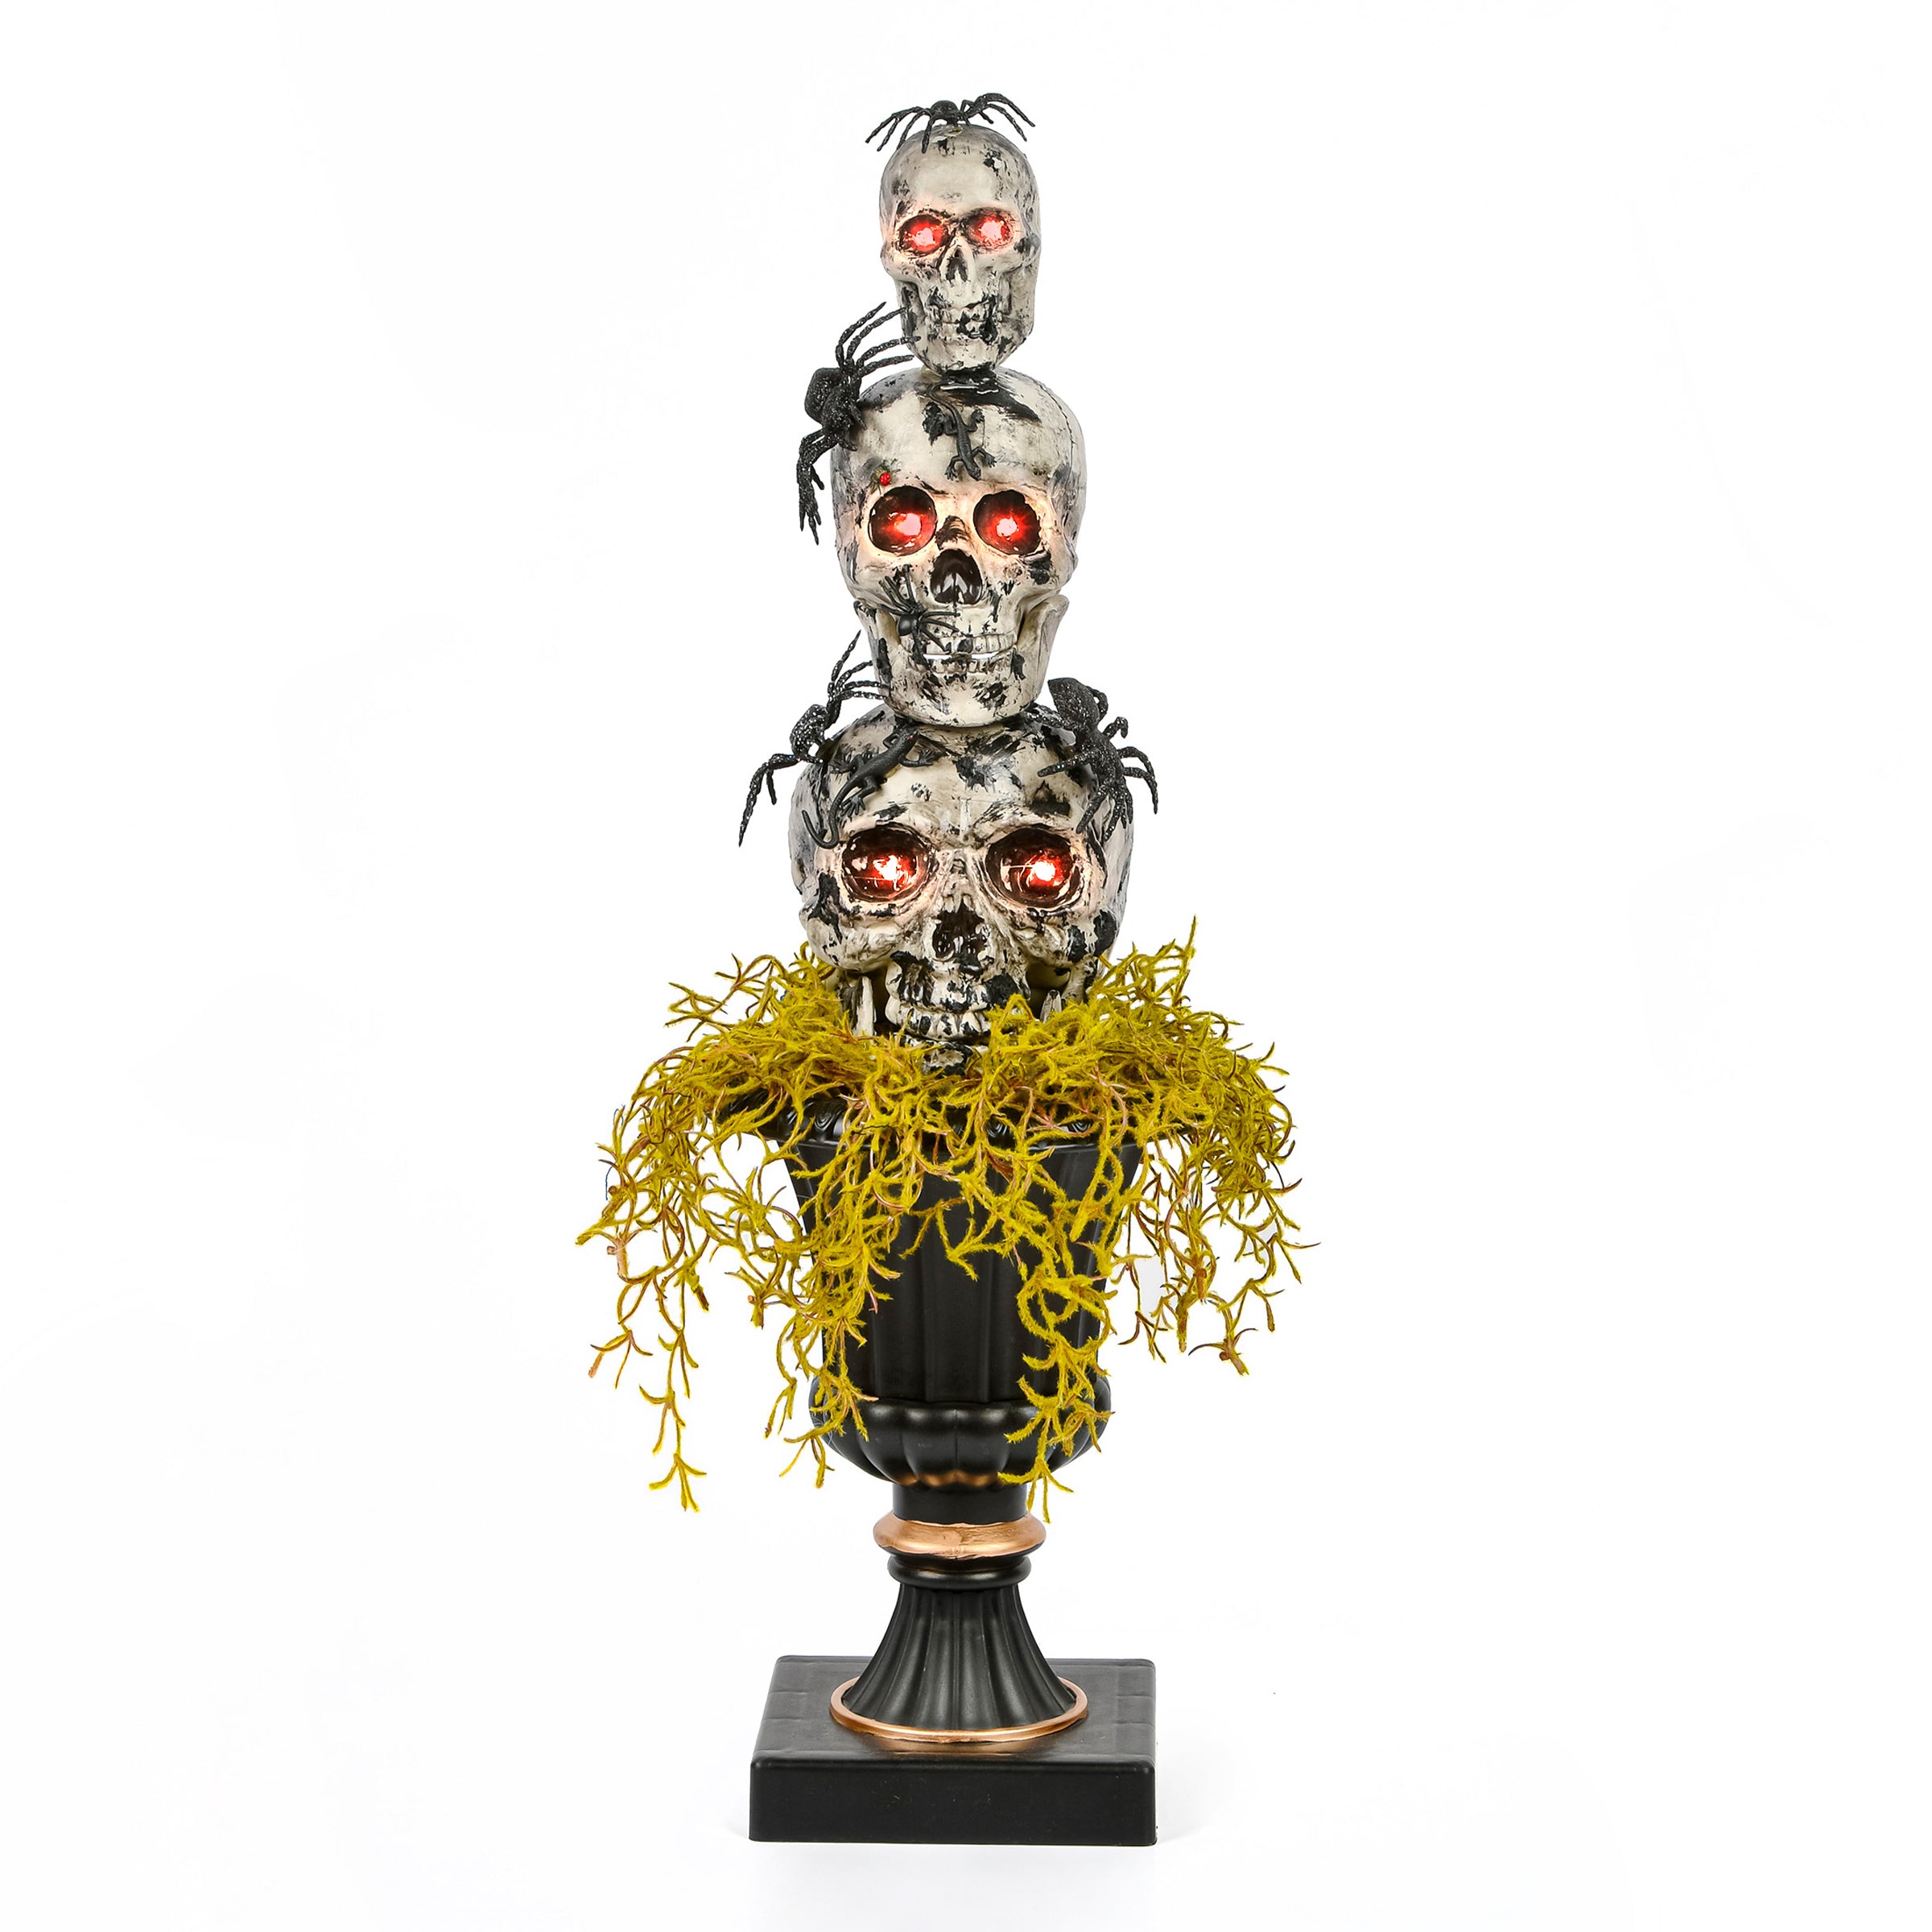 Halloween Tabletop Decoration, Black, Skull Tower, Decorated with Spiders, Includes Black Urn, 32 Inches